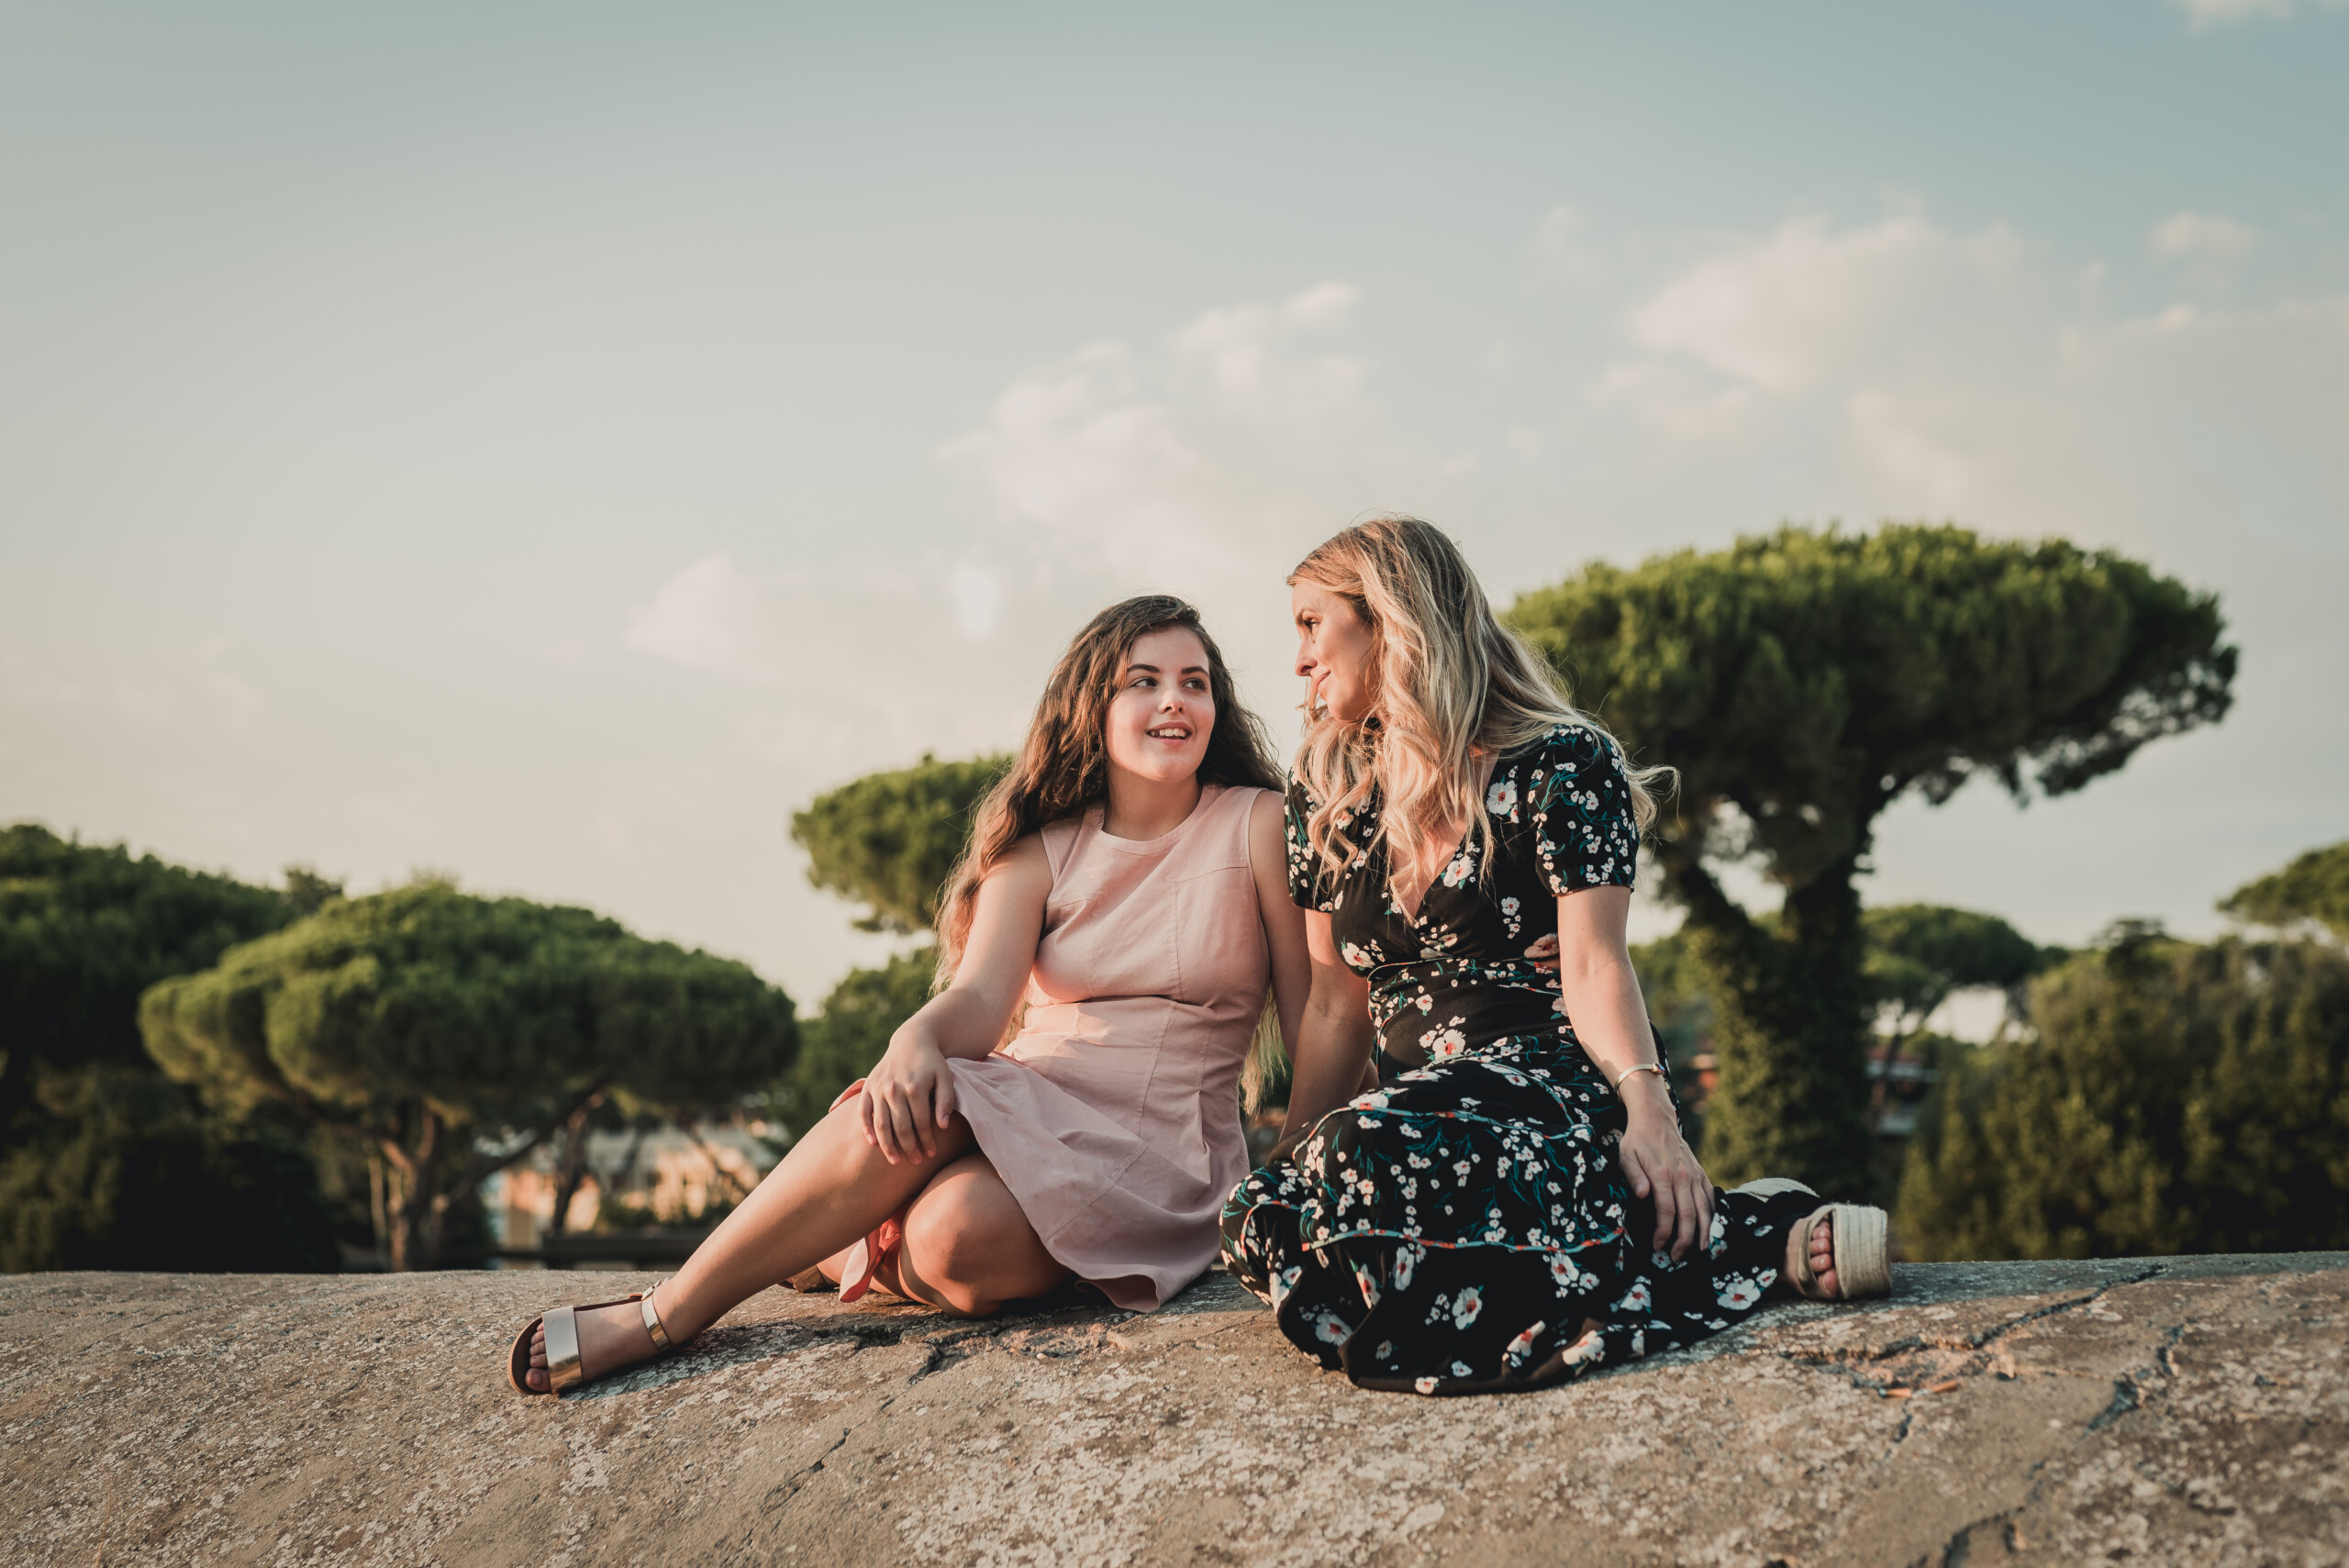 Family photoshoot by Emily, Localgrapher in Rome